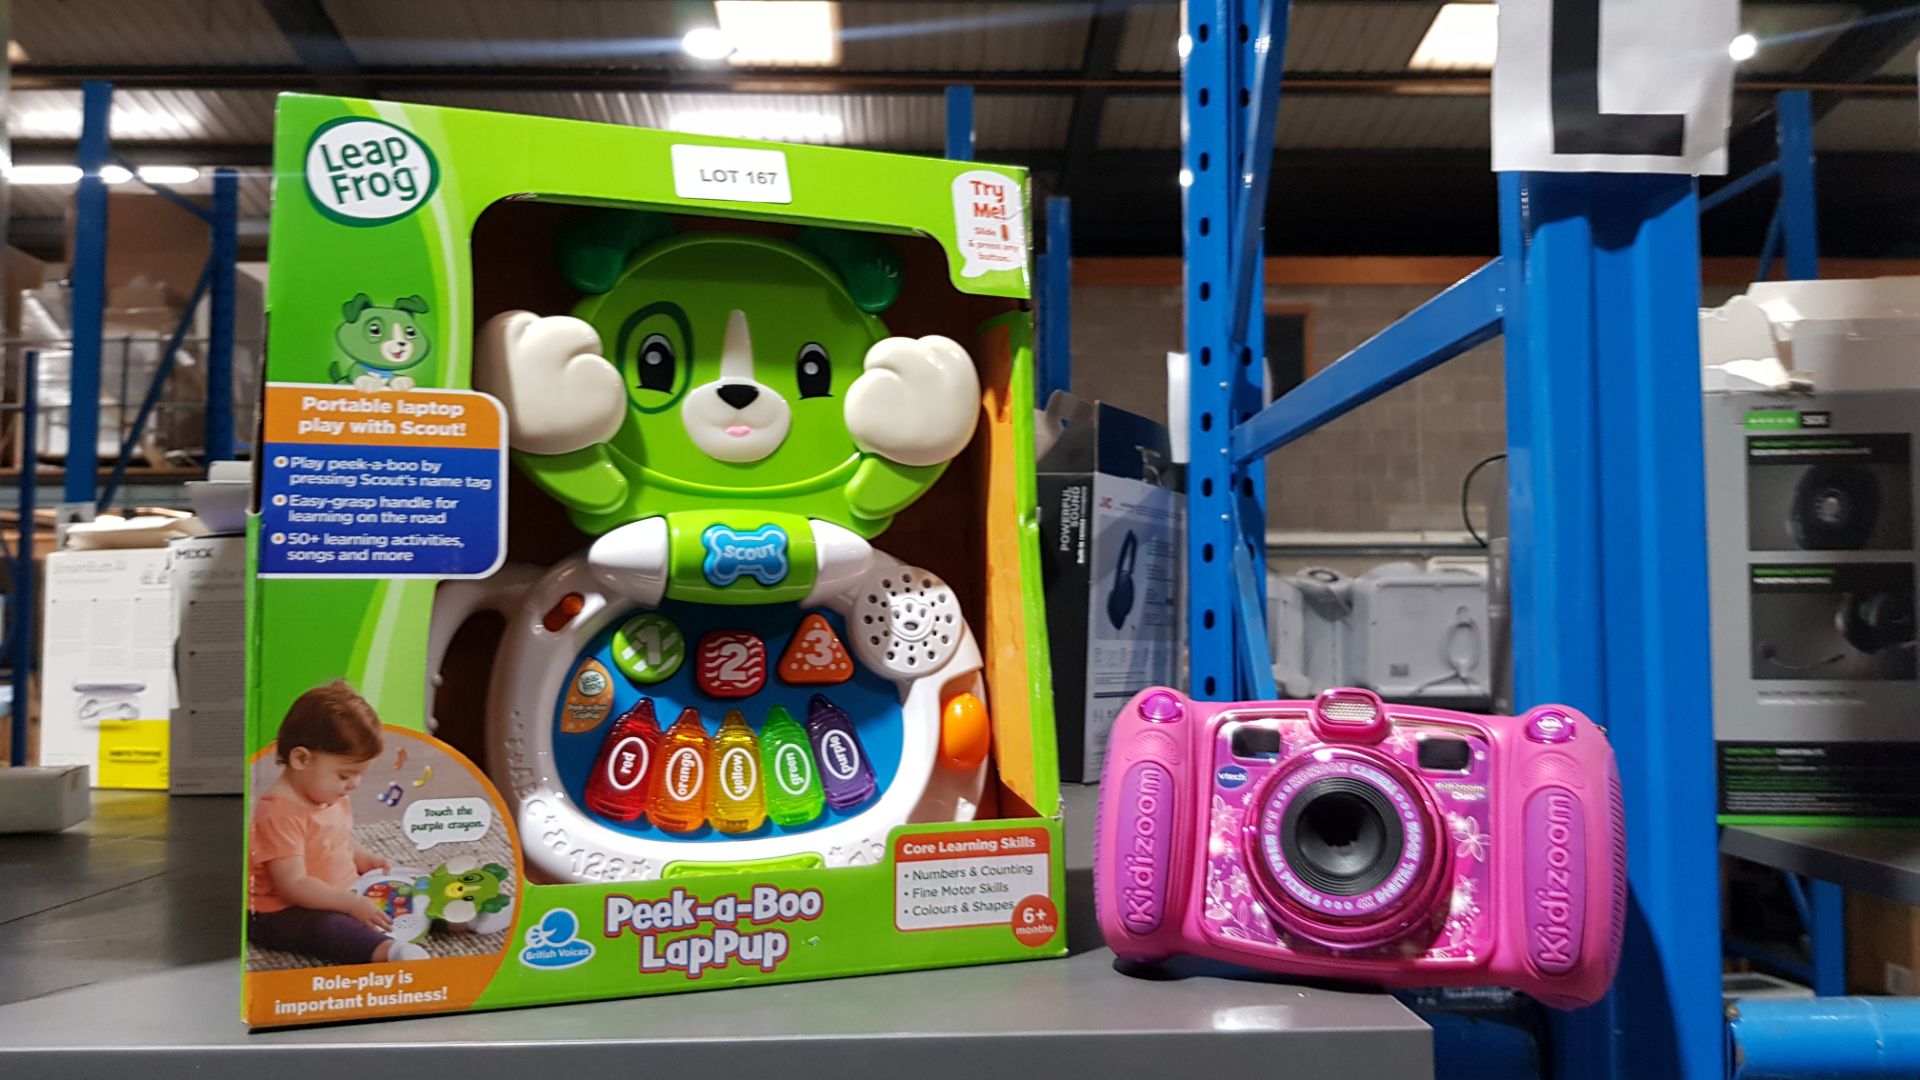 (R9K) Toys. 2 Items. 1 X Leap Frog Peek A Boo LapPup (New) & 1 x Vtech Kidizoom Duo Camera (No Box - Image 3 of 3